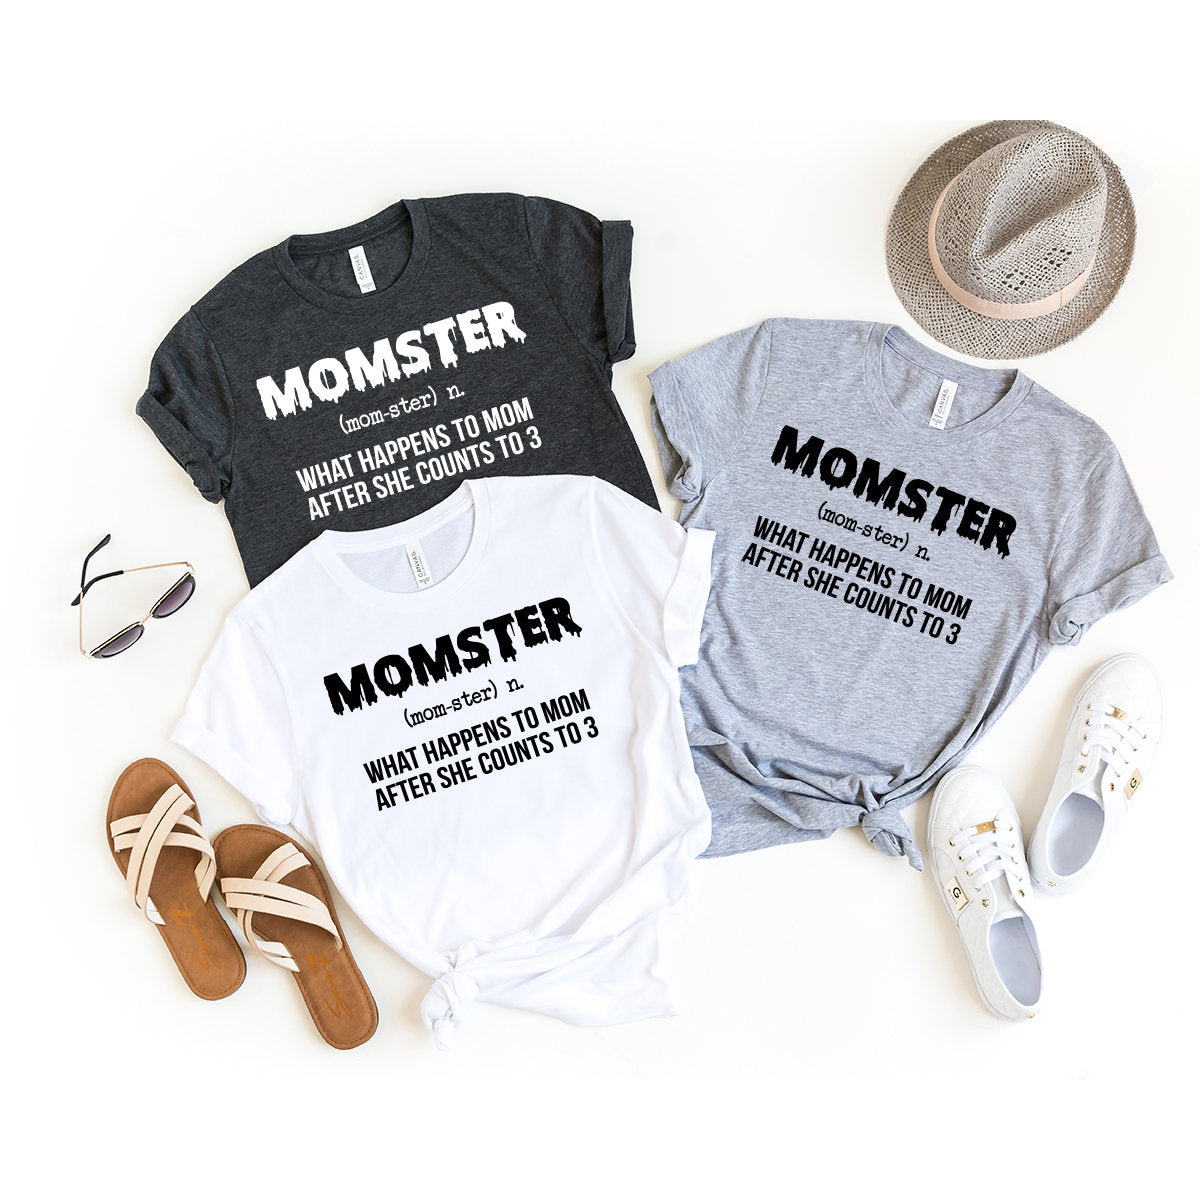 Momster Shirt, Halloween Mom Shirt, What Happens To Mom After She Counts To 3 Shirt, Momster Definition Tee, Mom-Ster Shirt, Mom Life Shirt - Fastdeliverytees.com